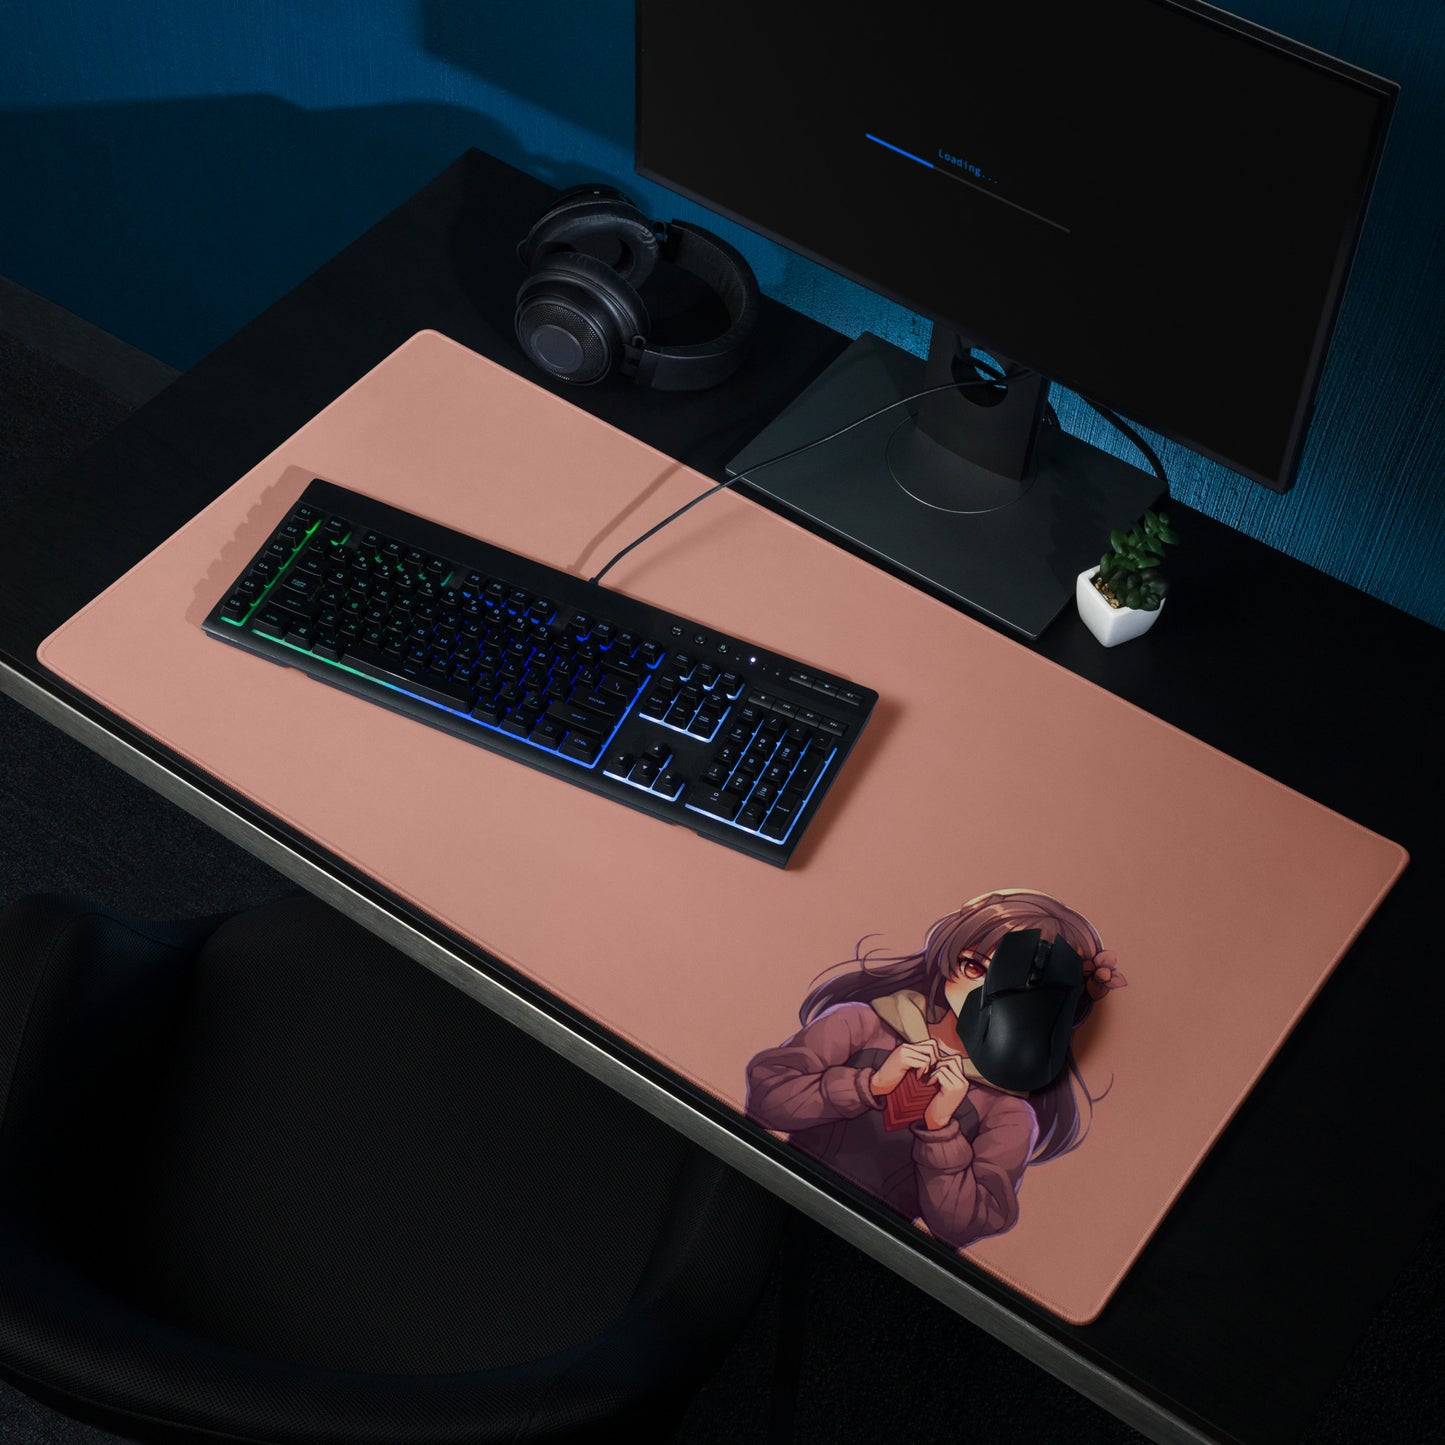 A 36" x 18" gaming desk pad with a blushing anime girl on a rose gold background laying on a desk.